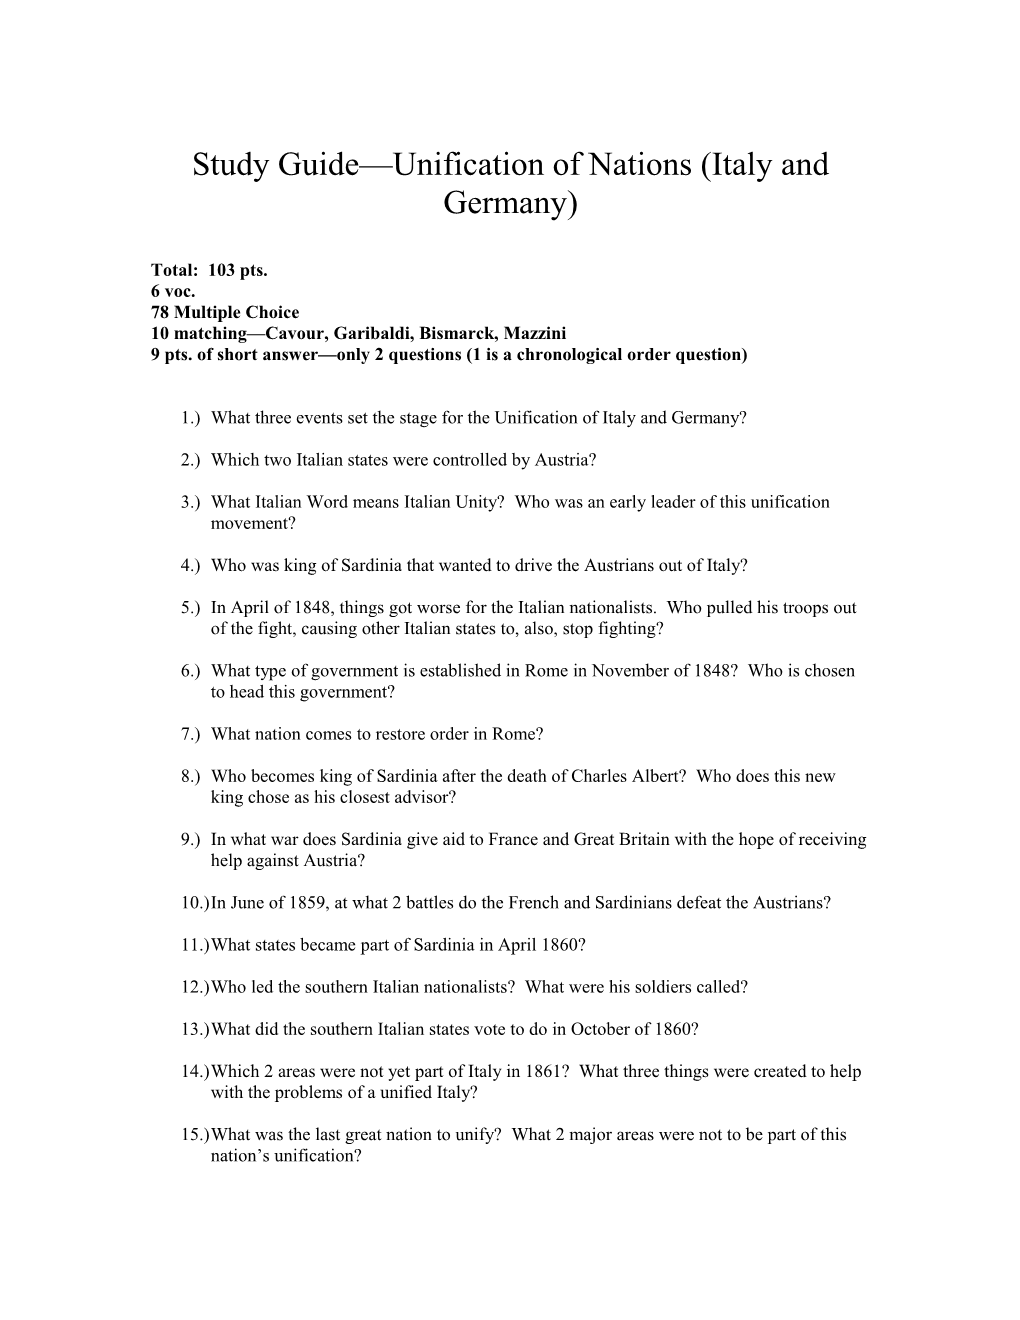 Study Guide—Unification Of Nations (Italy And Germany)